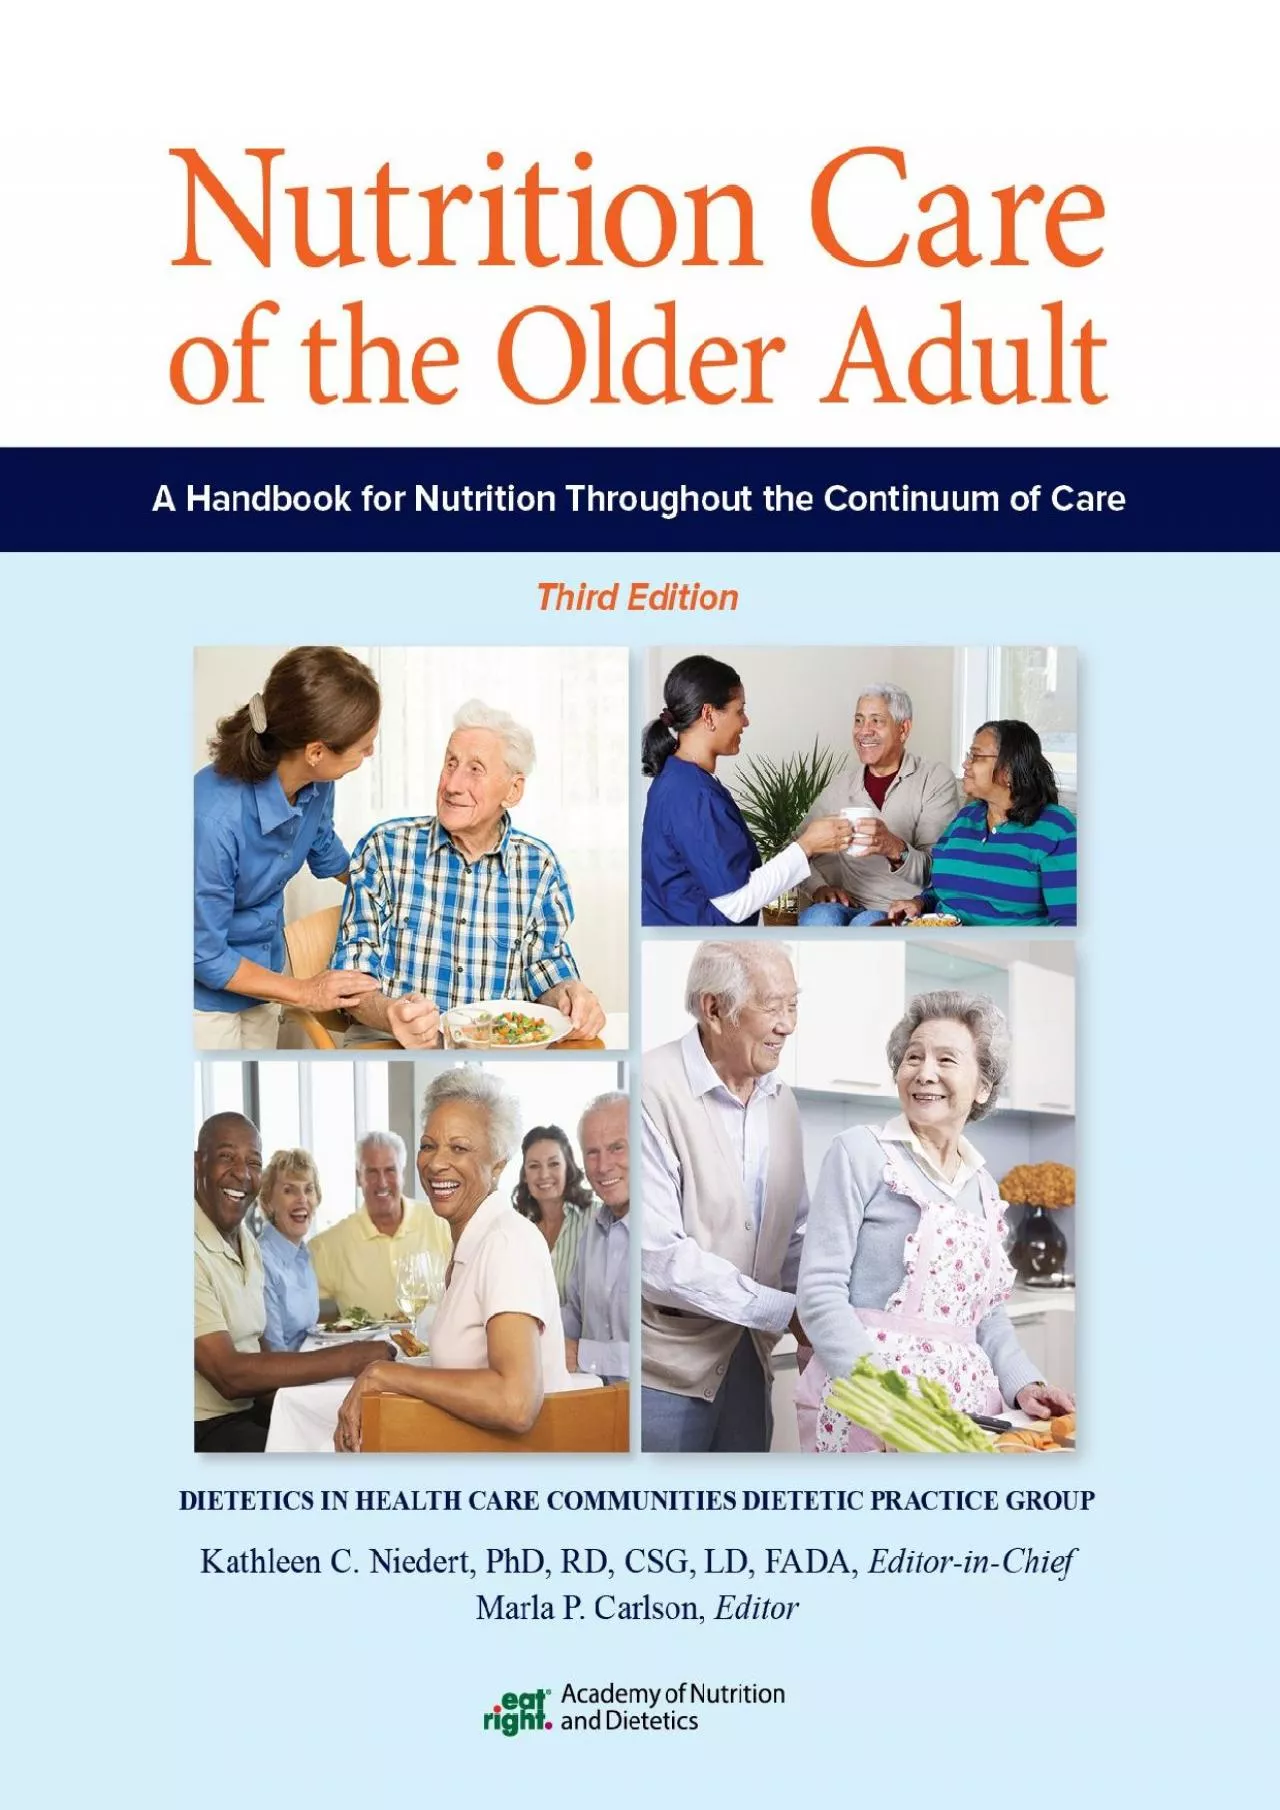 (BOOK)-Nutrition Care of the Older Adult: A Handbook of Nutrition throughout the Continuum